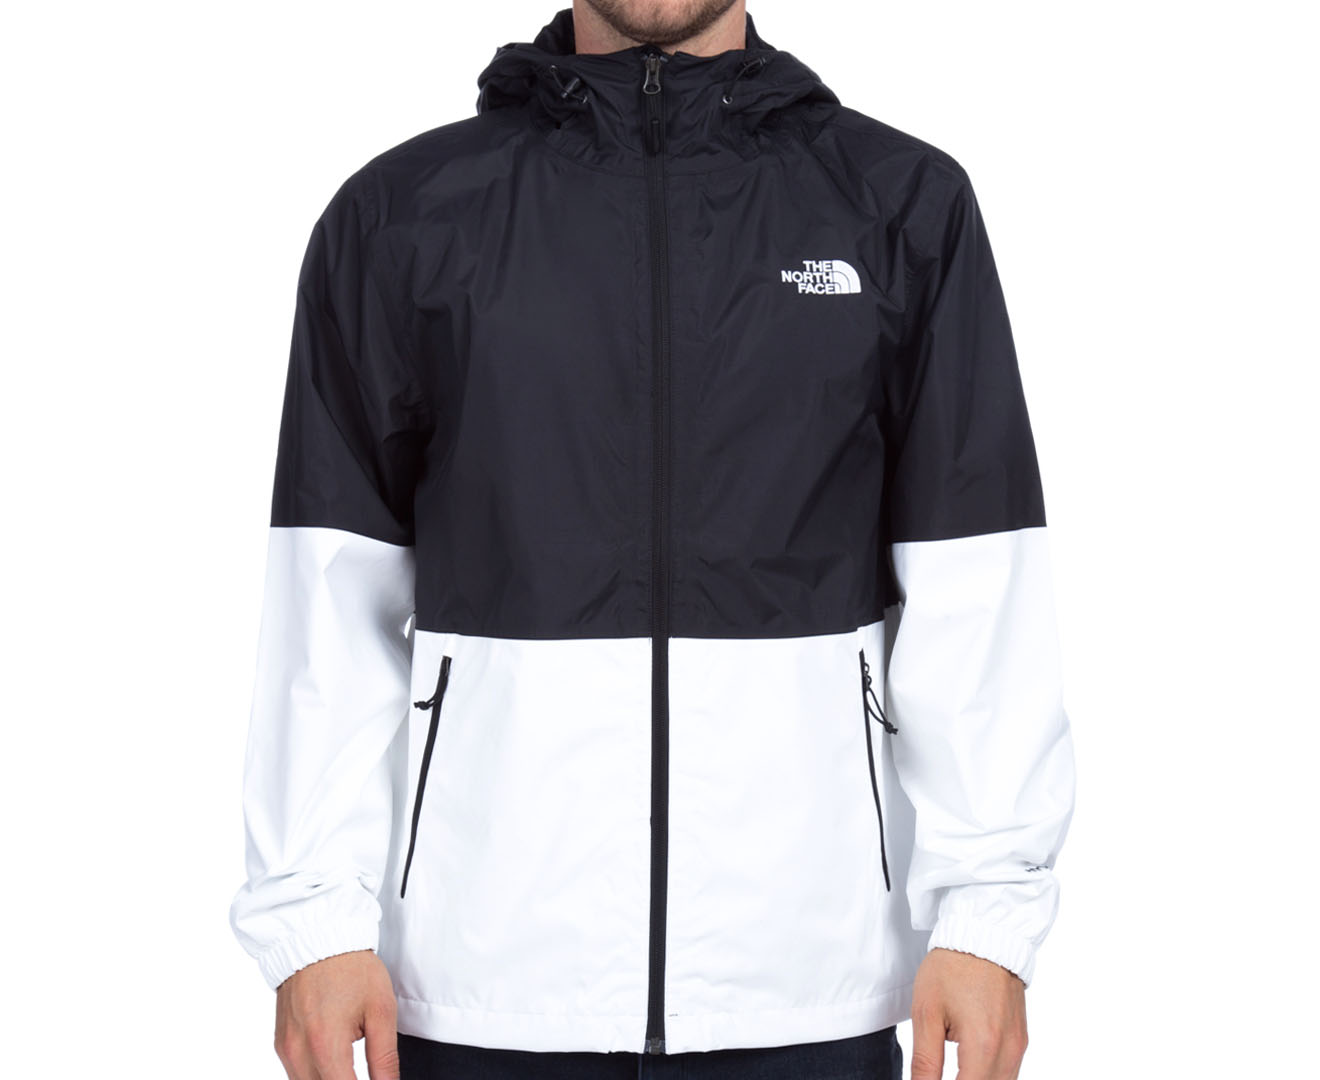 The North Face Allabout Jacket Men's